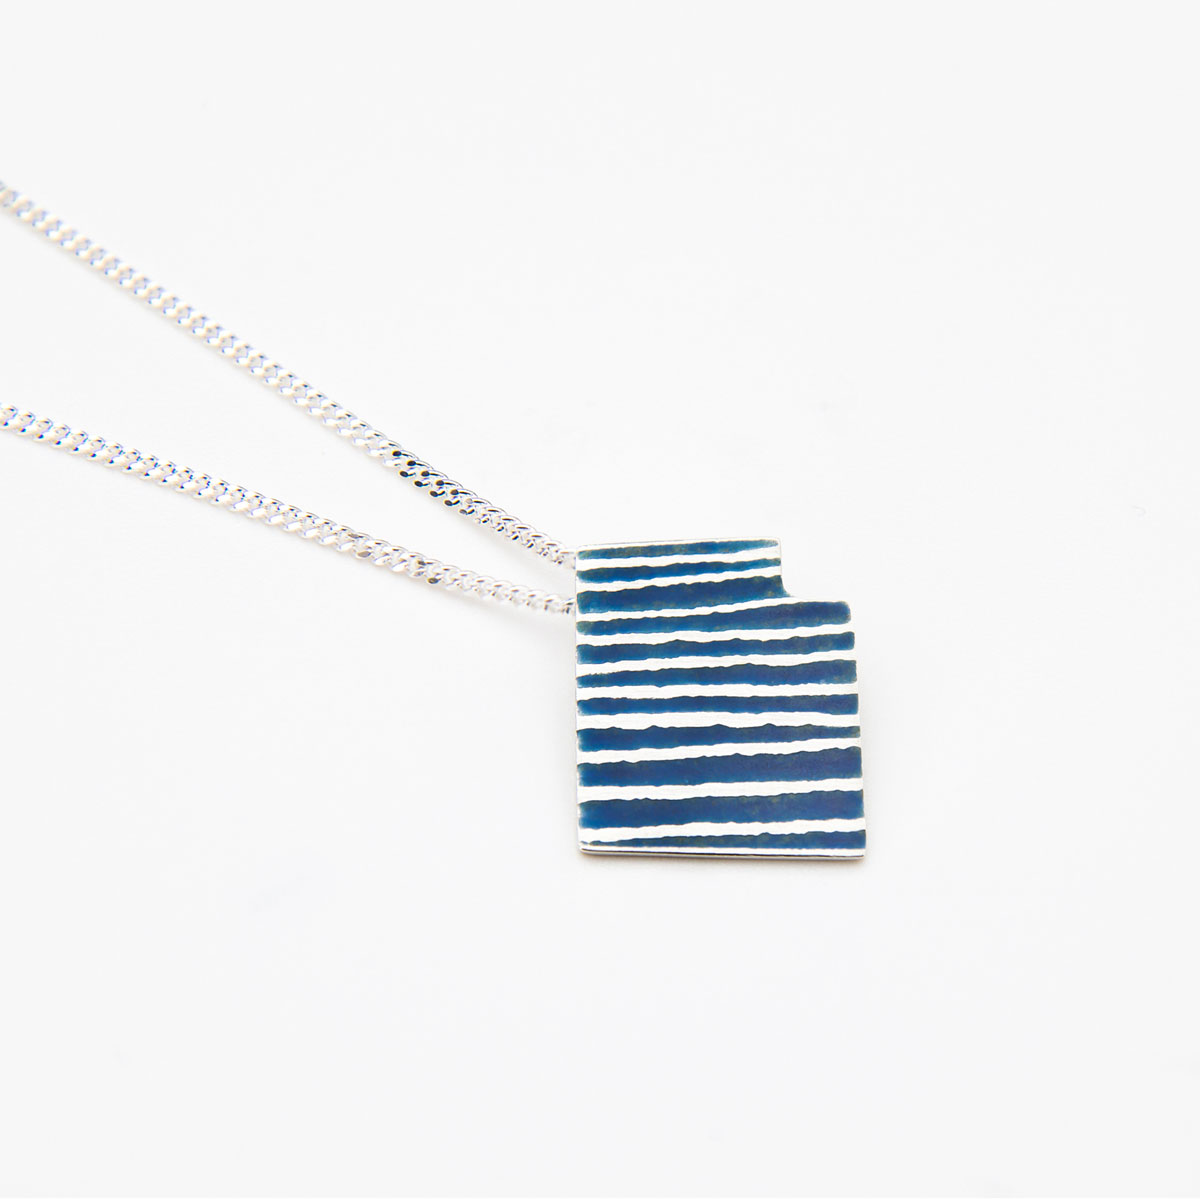 ‘Lines in Motion’ Blue-Grey Pendant, Small